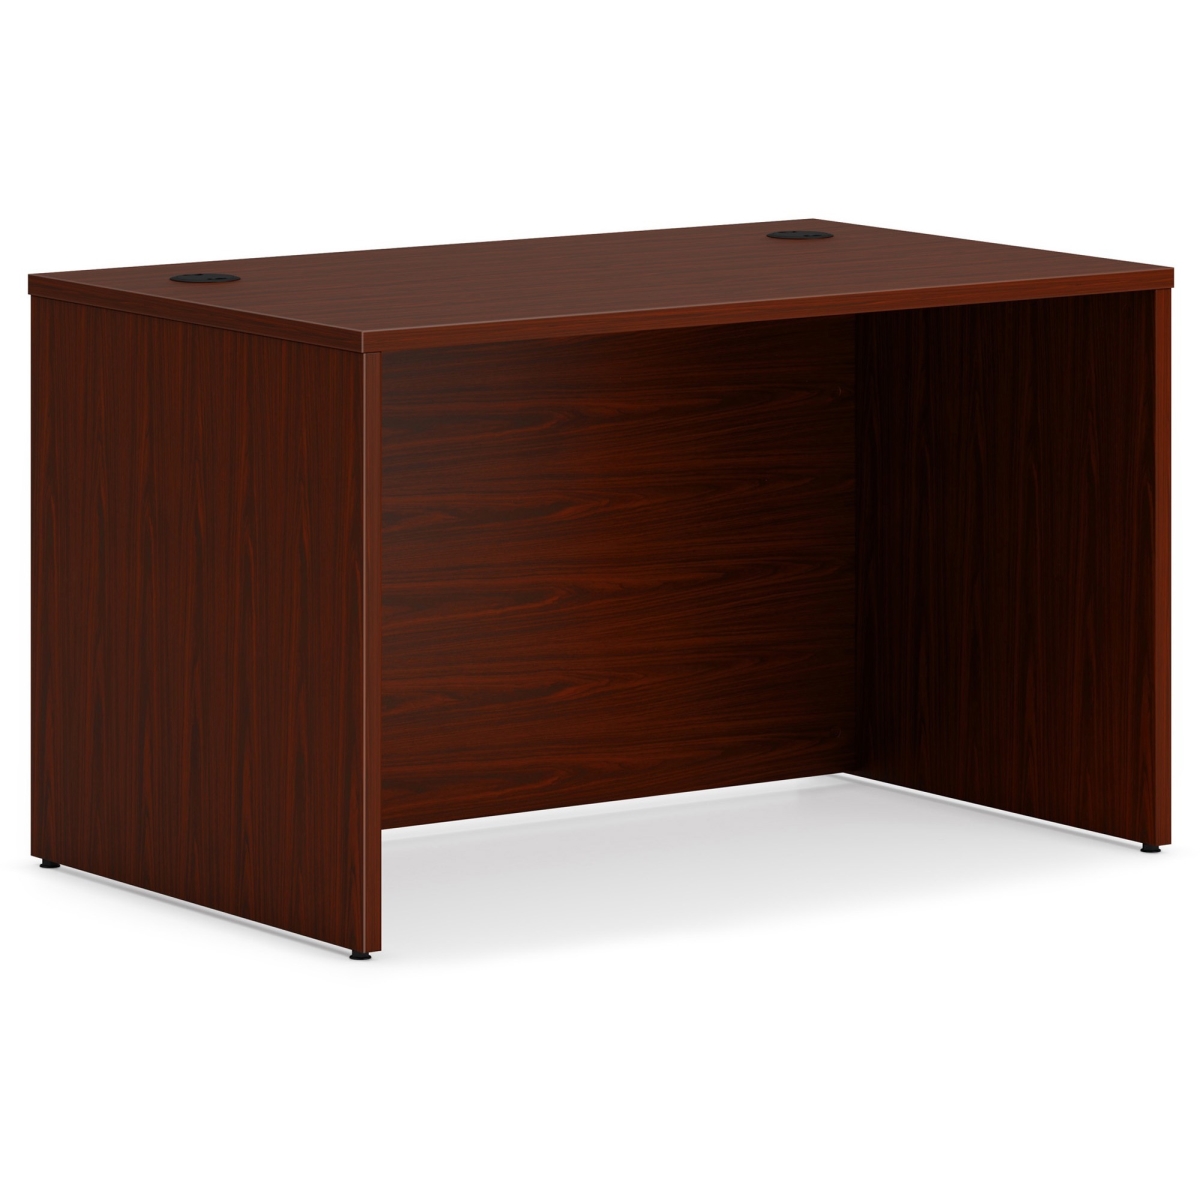 UPC 194966436598 product image for LDS4830LT1 48 in. Rectangle Shell Desk, Mahogany | upcitemdb.com